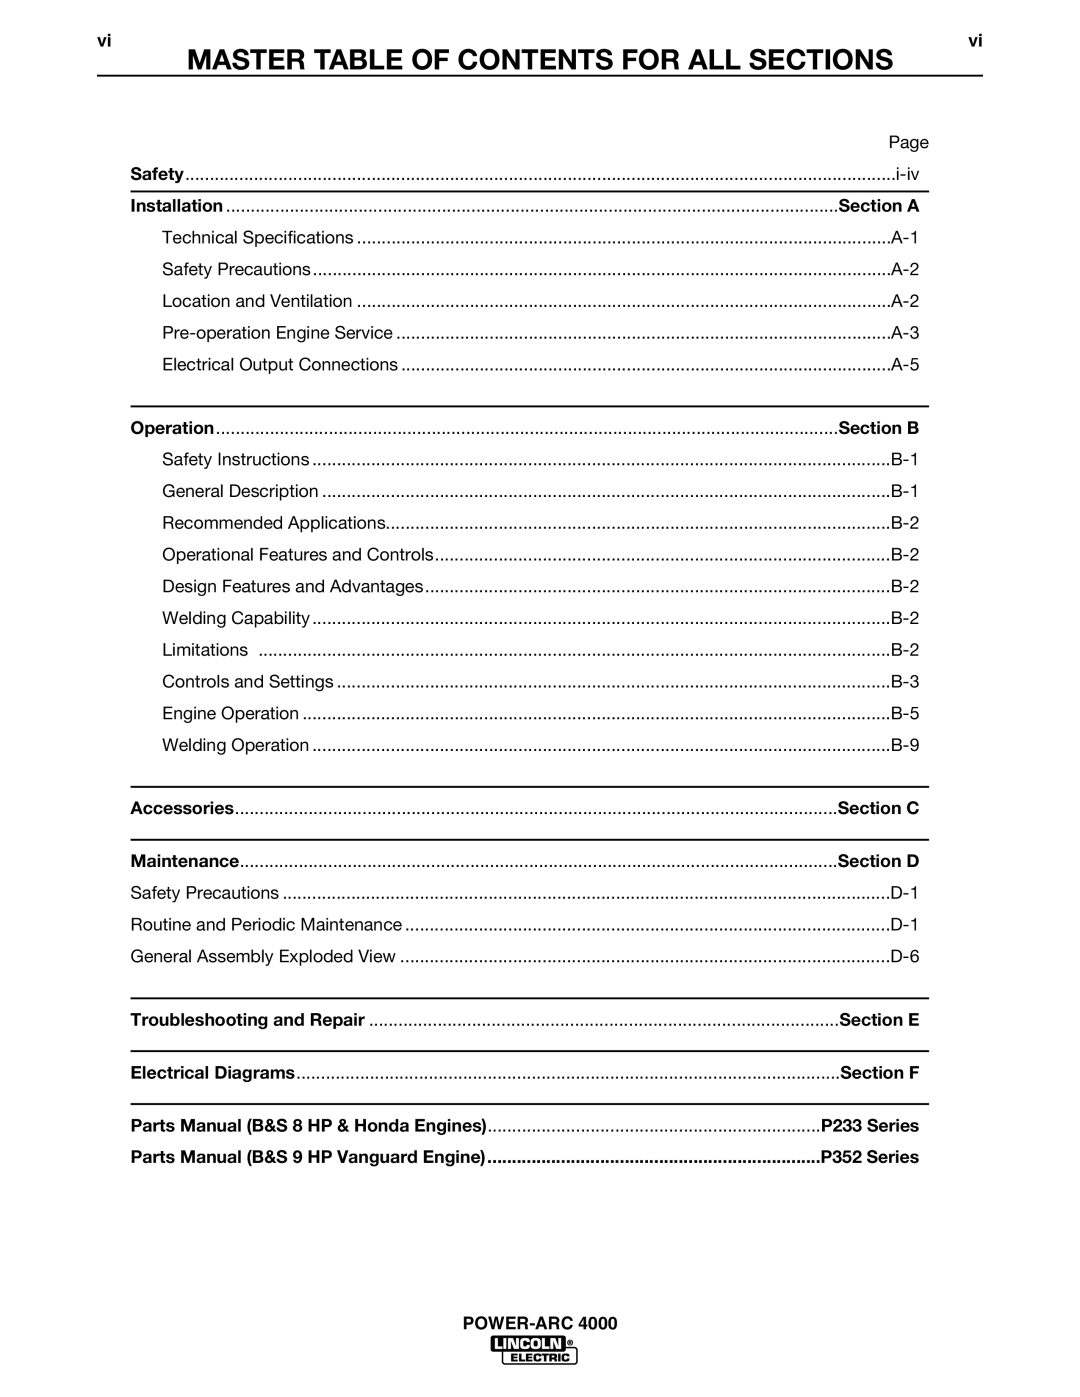 Lincoln POWER-ARC 4000 Power-Arc, Master Table Of Contents For All Sections, Section A, Section B, Section C, Section D 